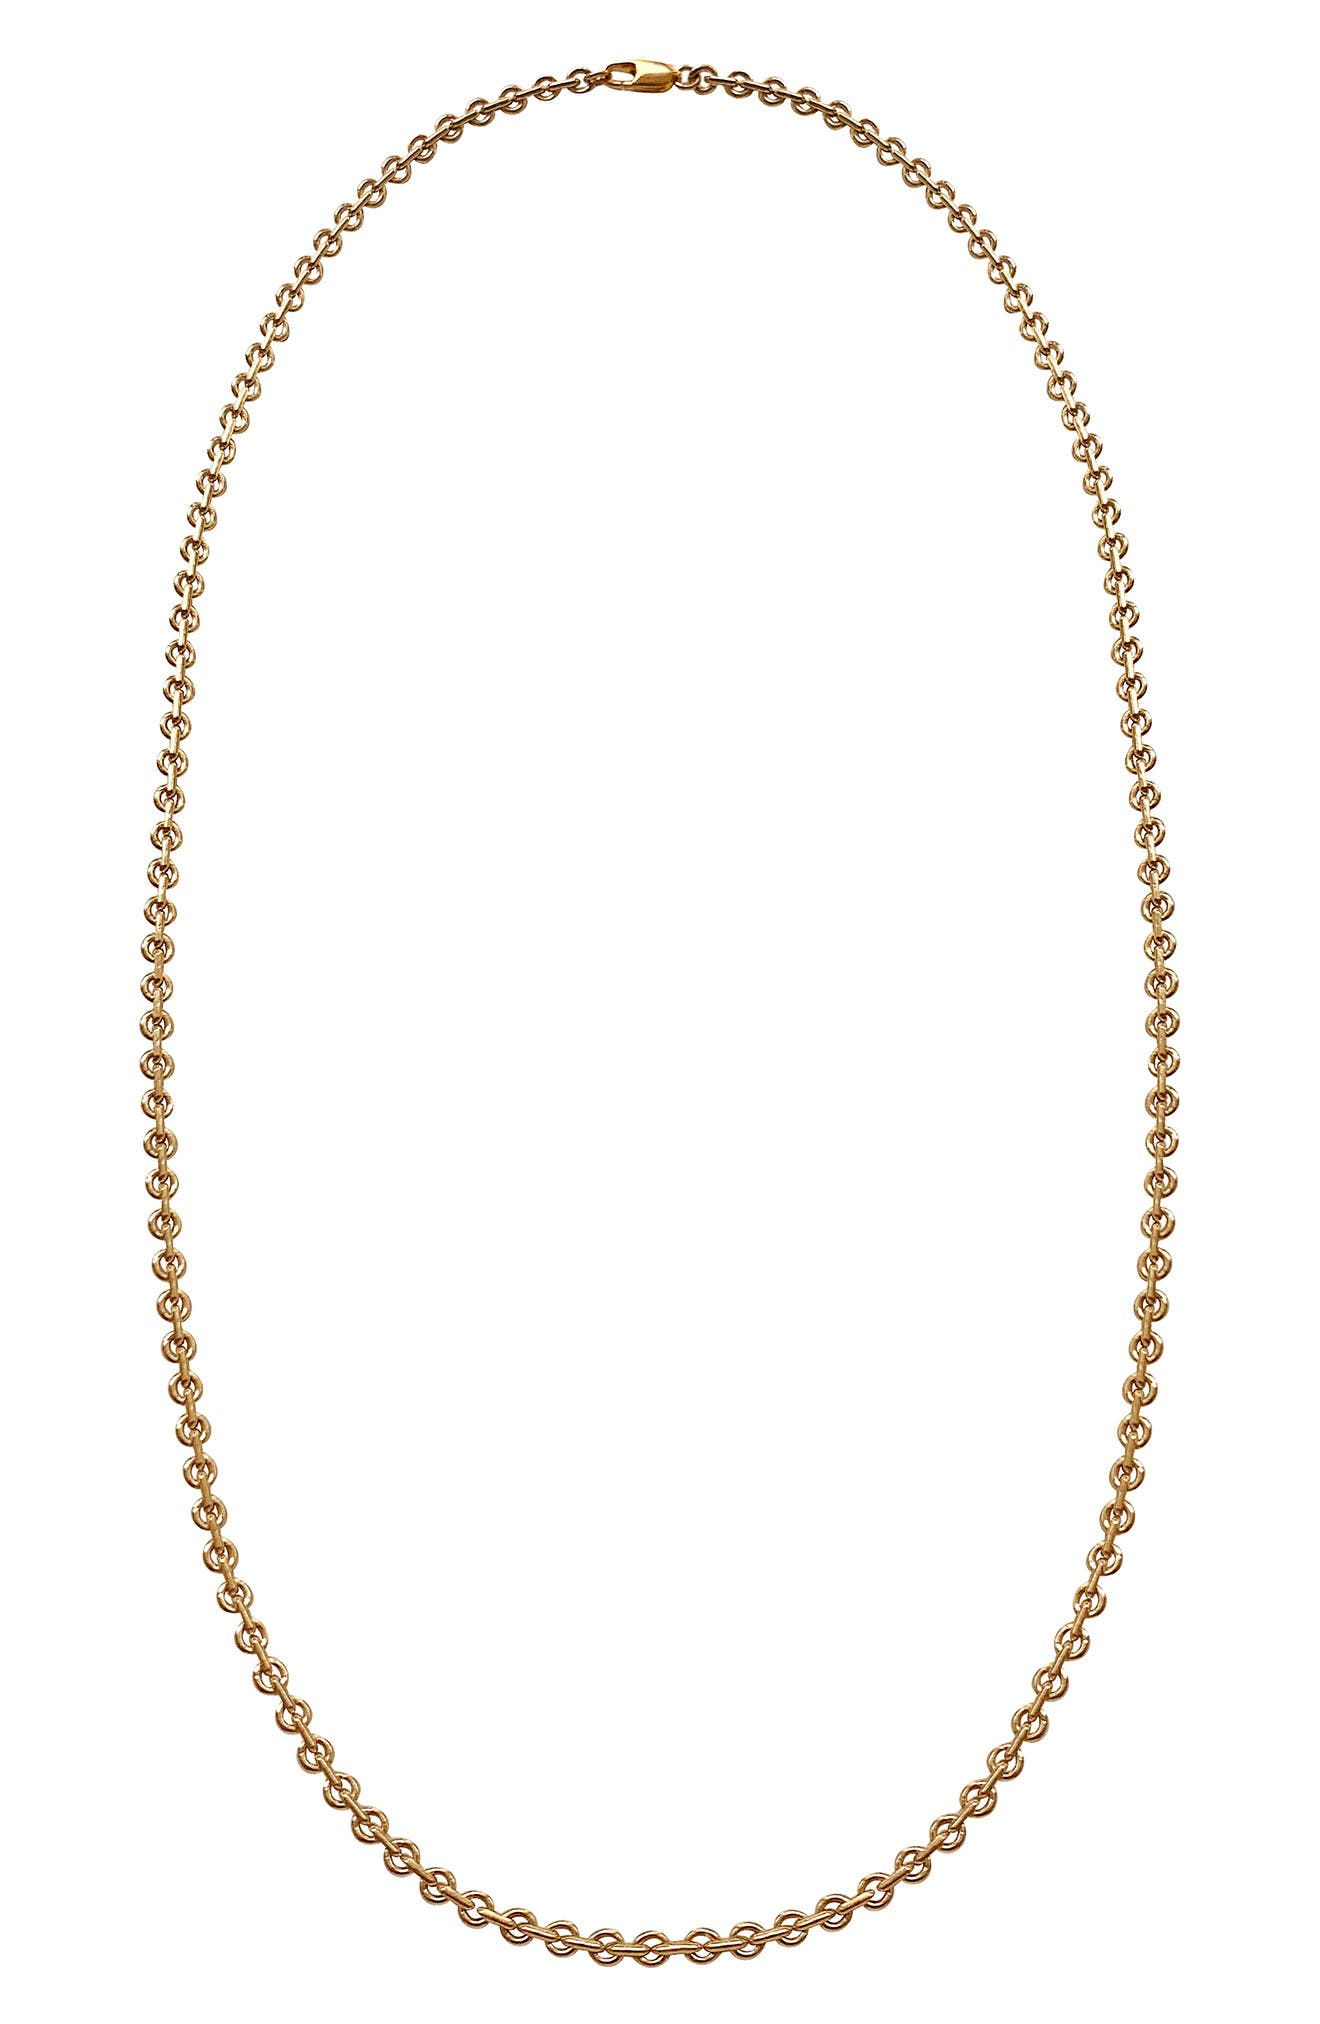 Laura Lombardi Pina Chain Necklace in Brass at Nordstrom, Size 18 Us